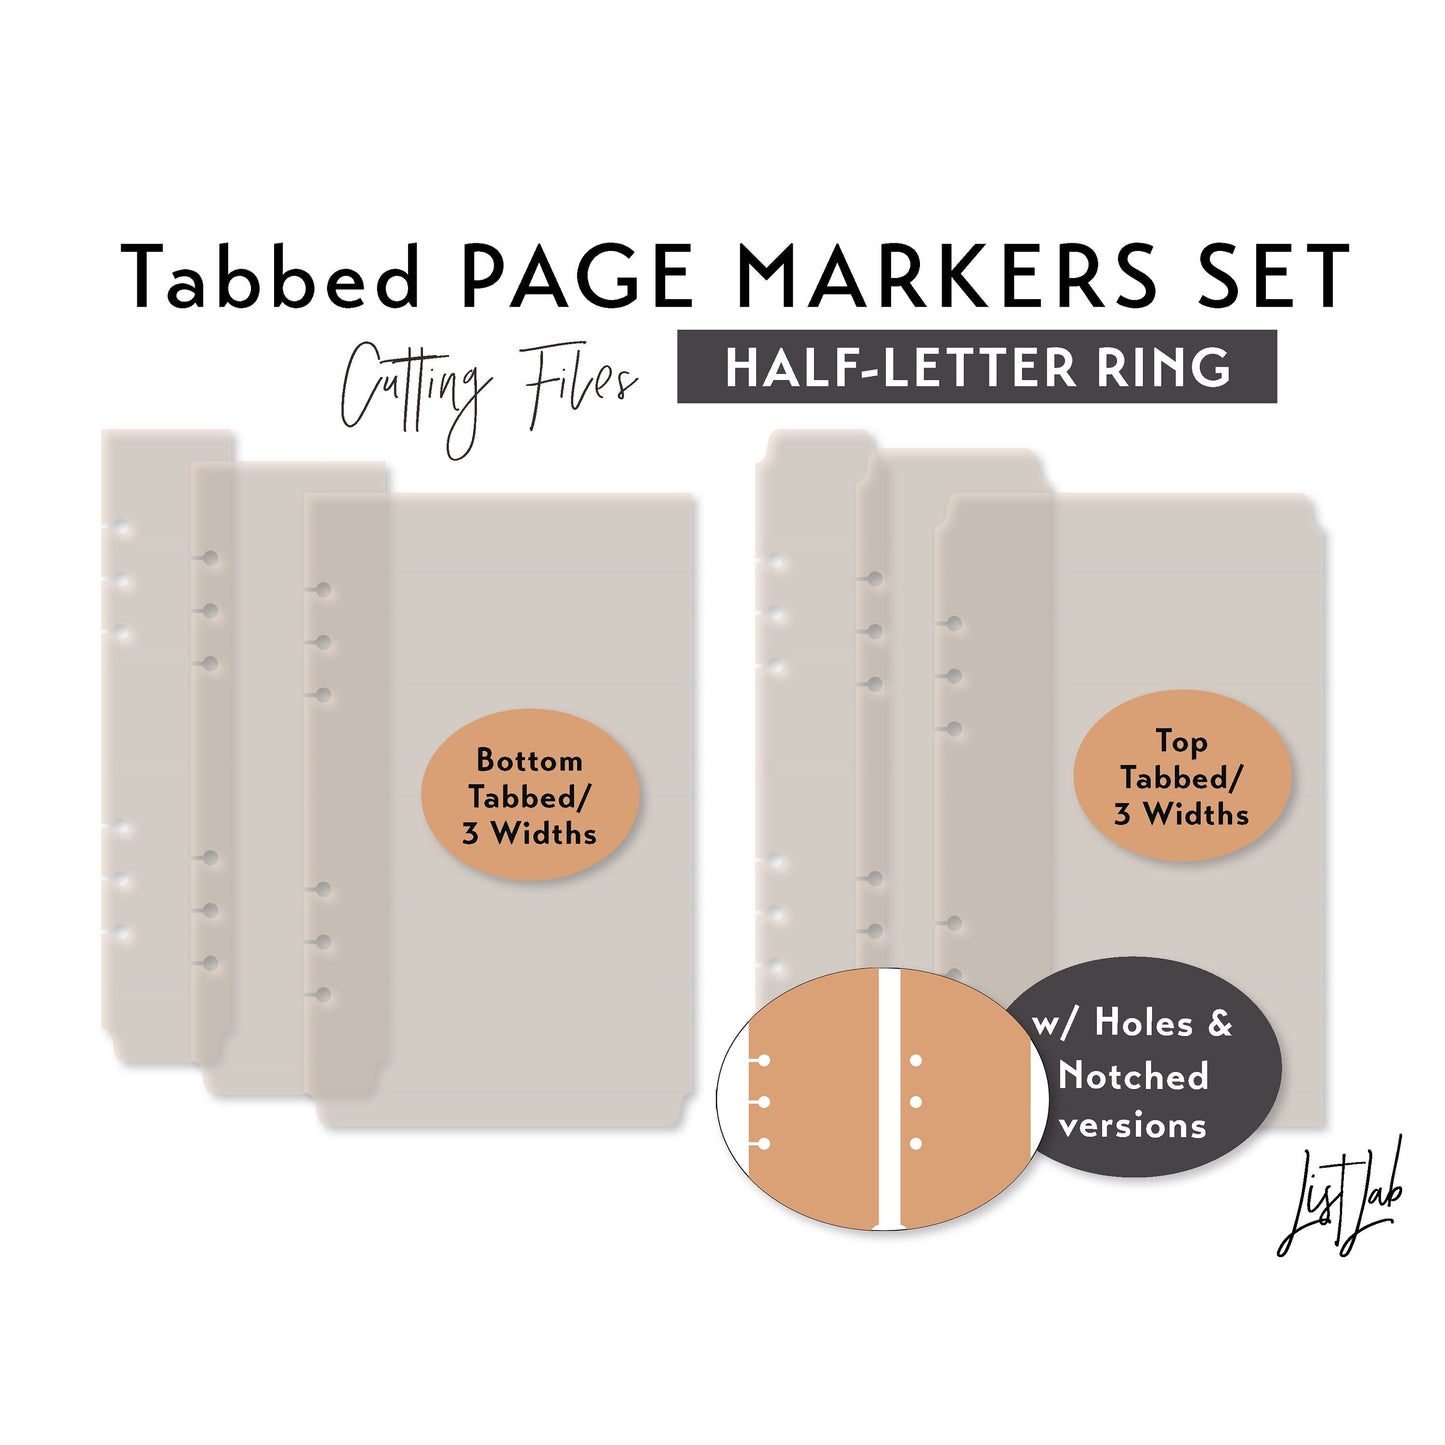 Half-letter Ring Tabbed Page Markers - 3 widths – Cutting Files Set